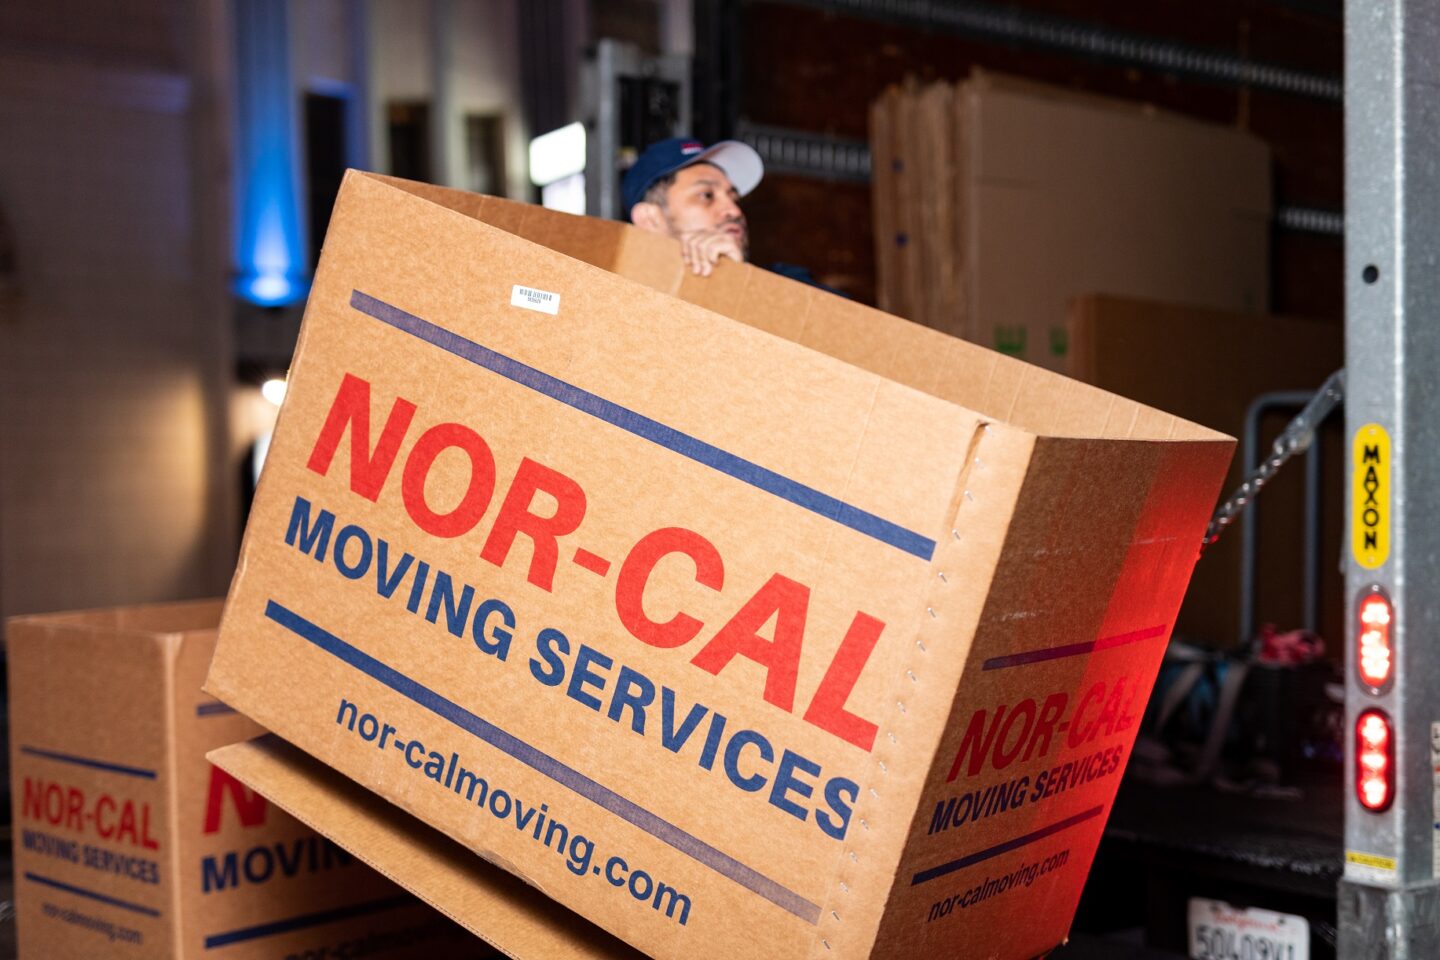 nor-cal moving services